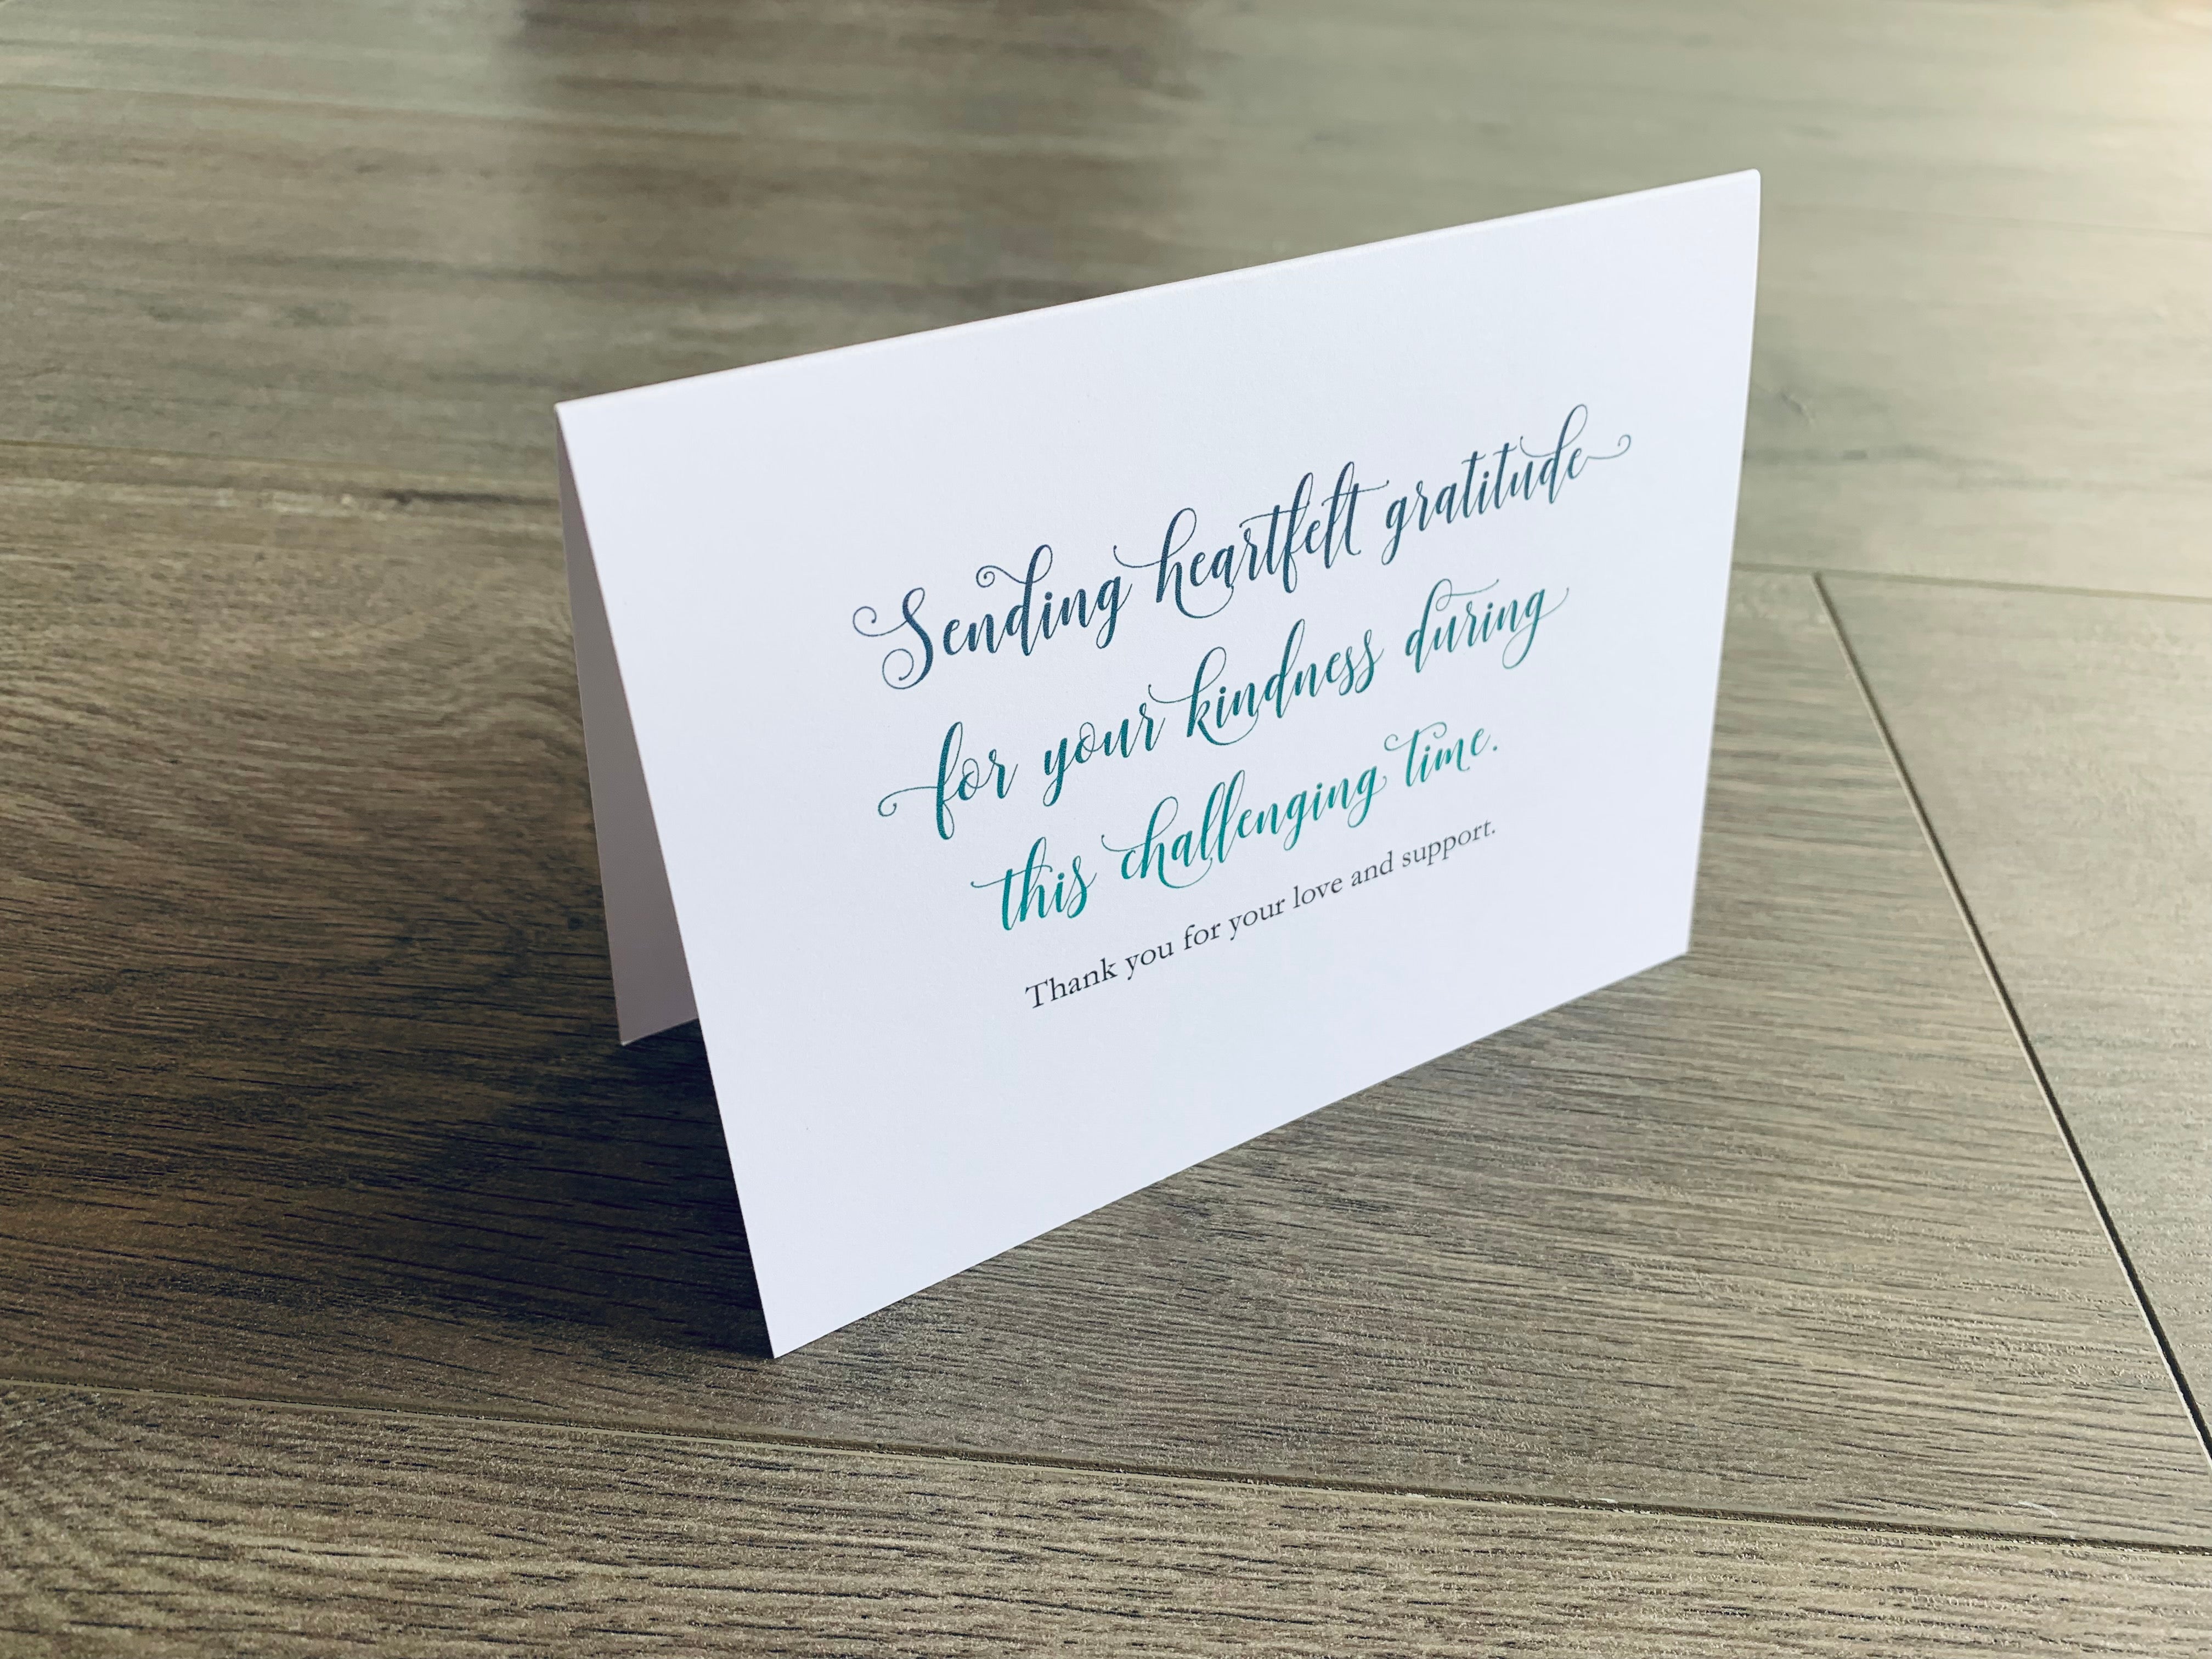 A folded white notecard is propped up on a wooden floor. The card reads, "Sending heartfelt gratitude for your kindness during this challenging time. Thank you for your love and support." Stationare's Surviving Hard Times collection.